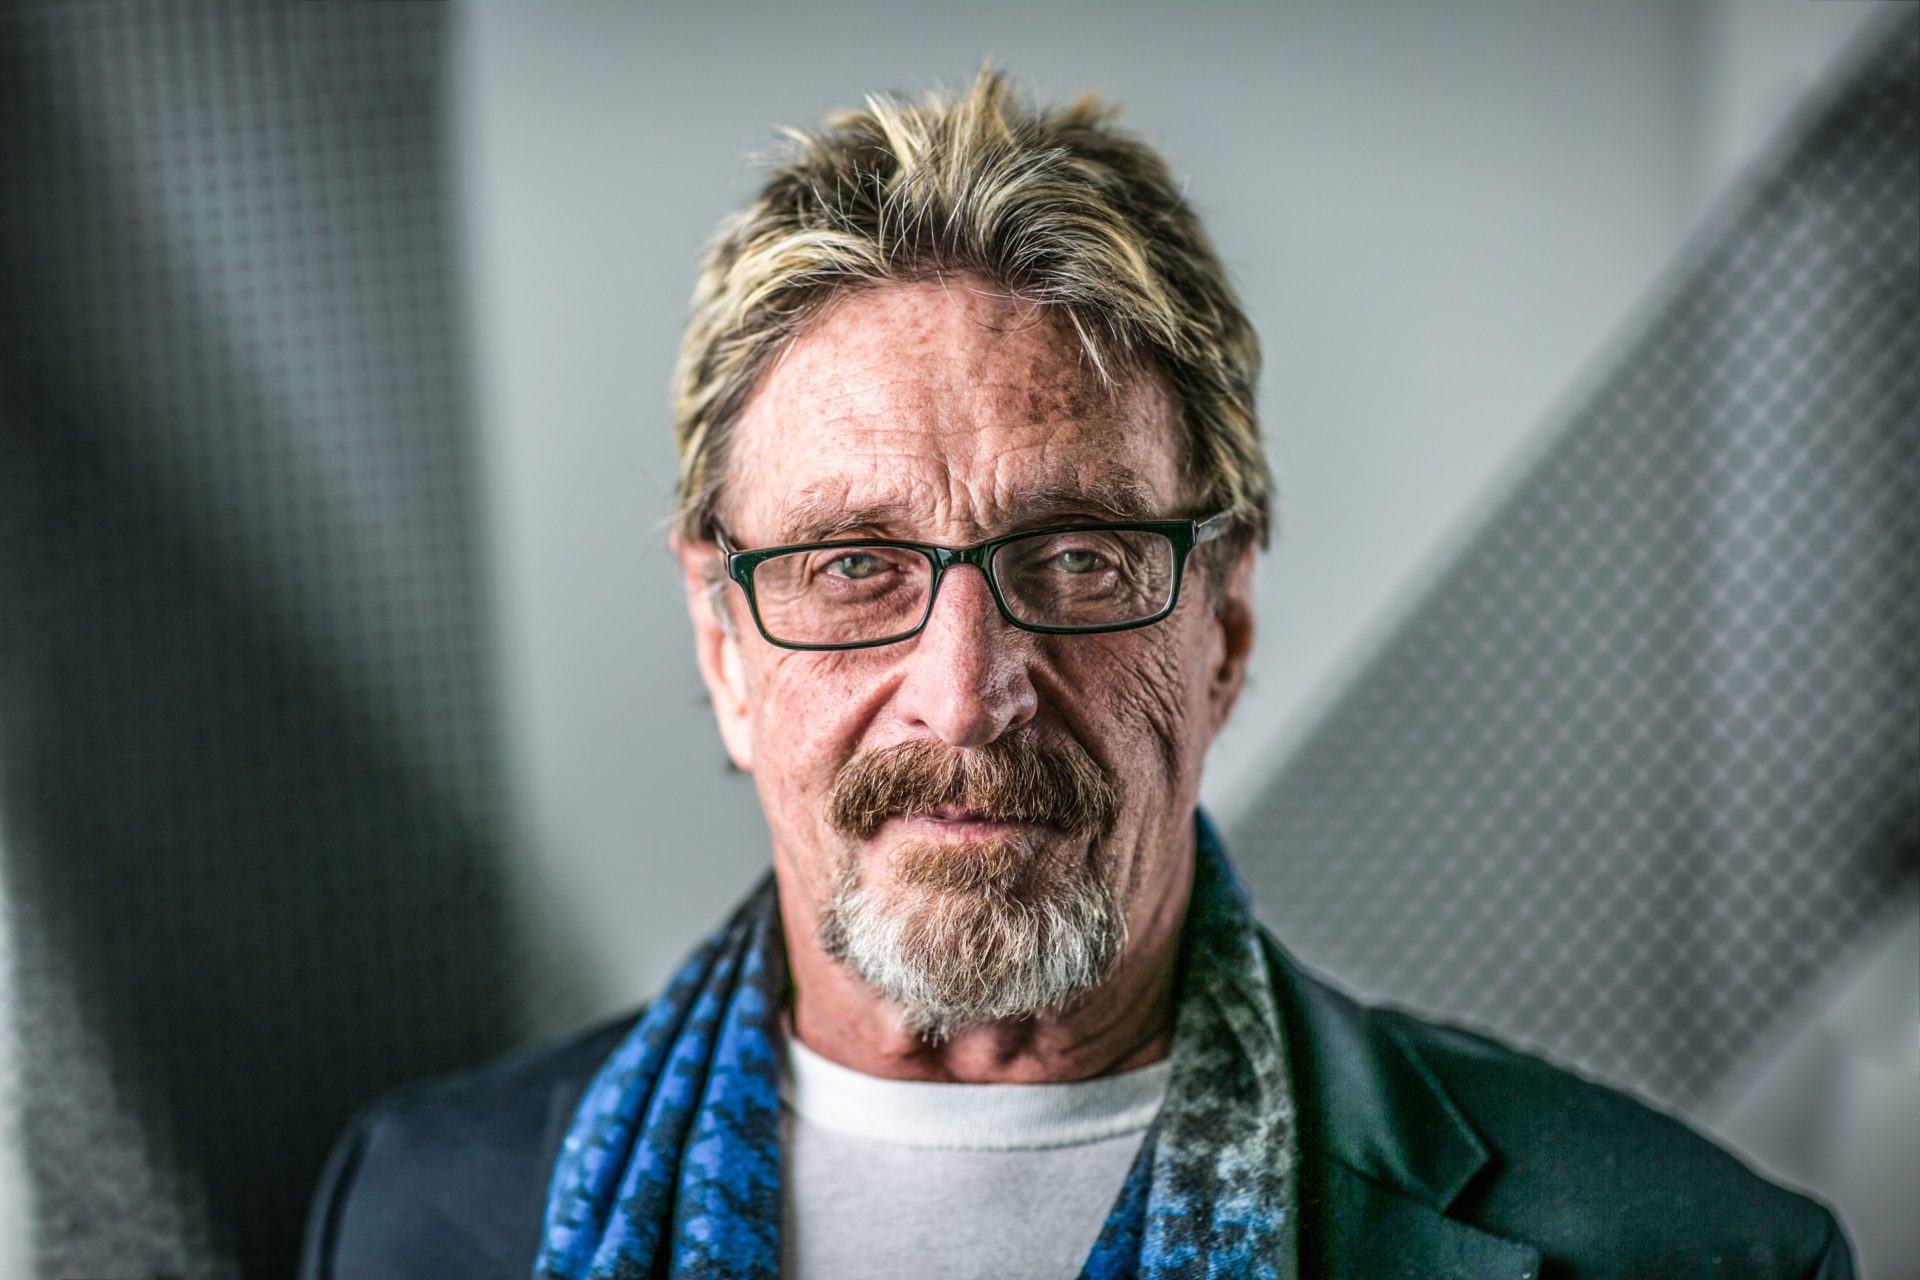 Team McAfee launches McAfee Market Cap and McAfee Crypto Team Websites